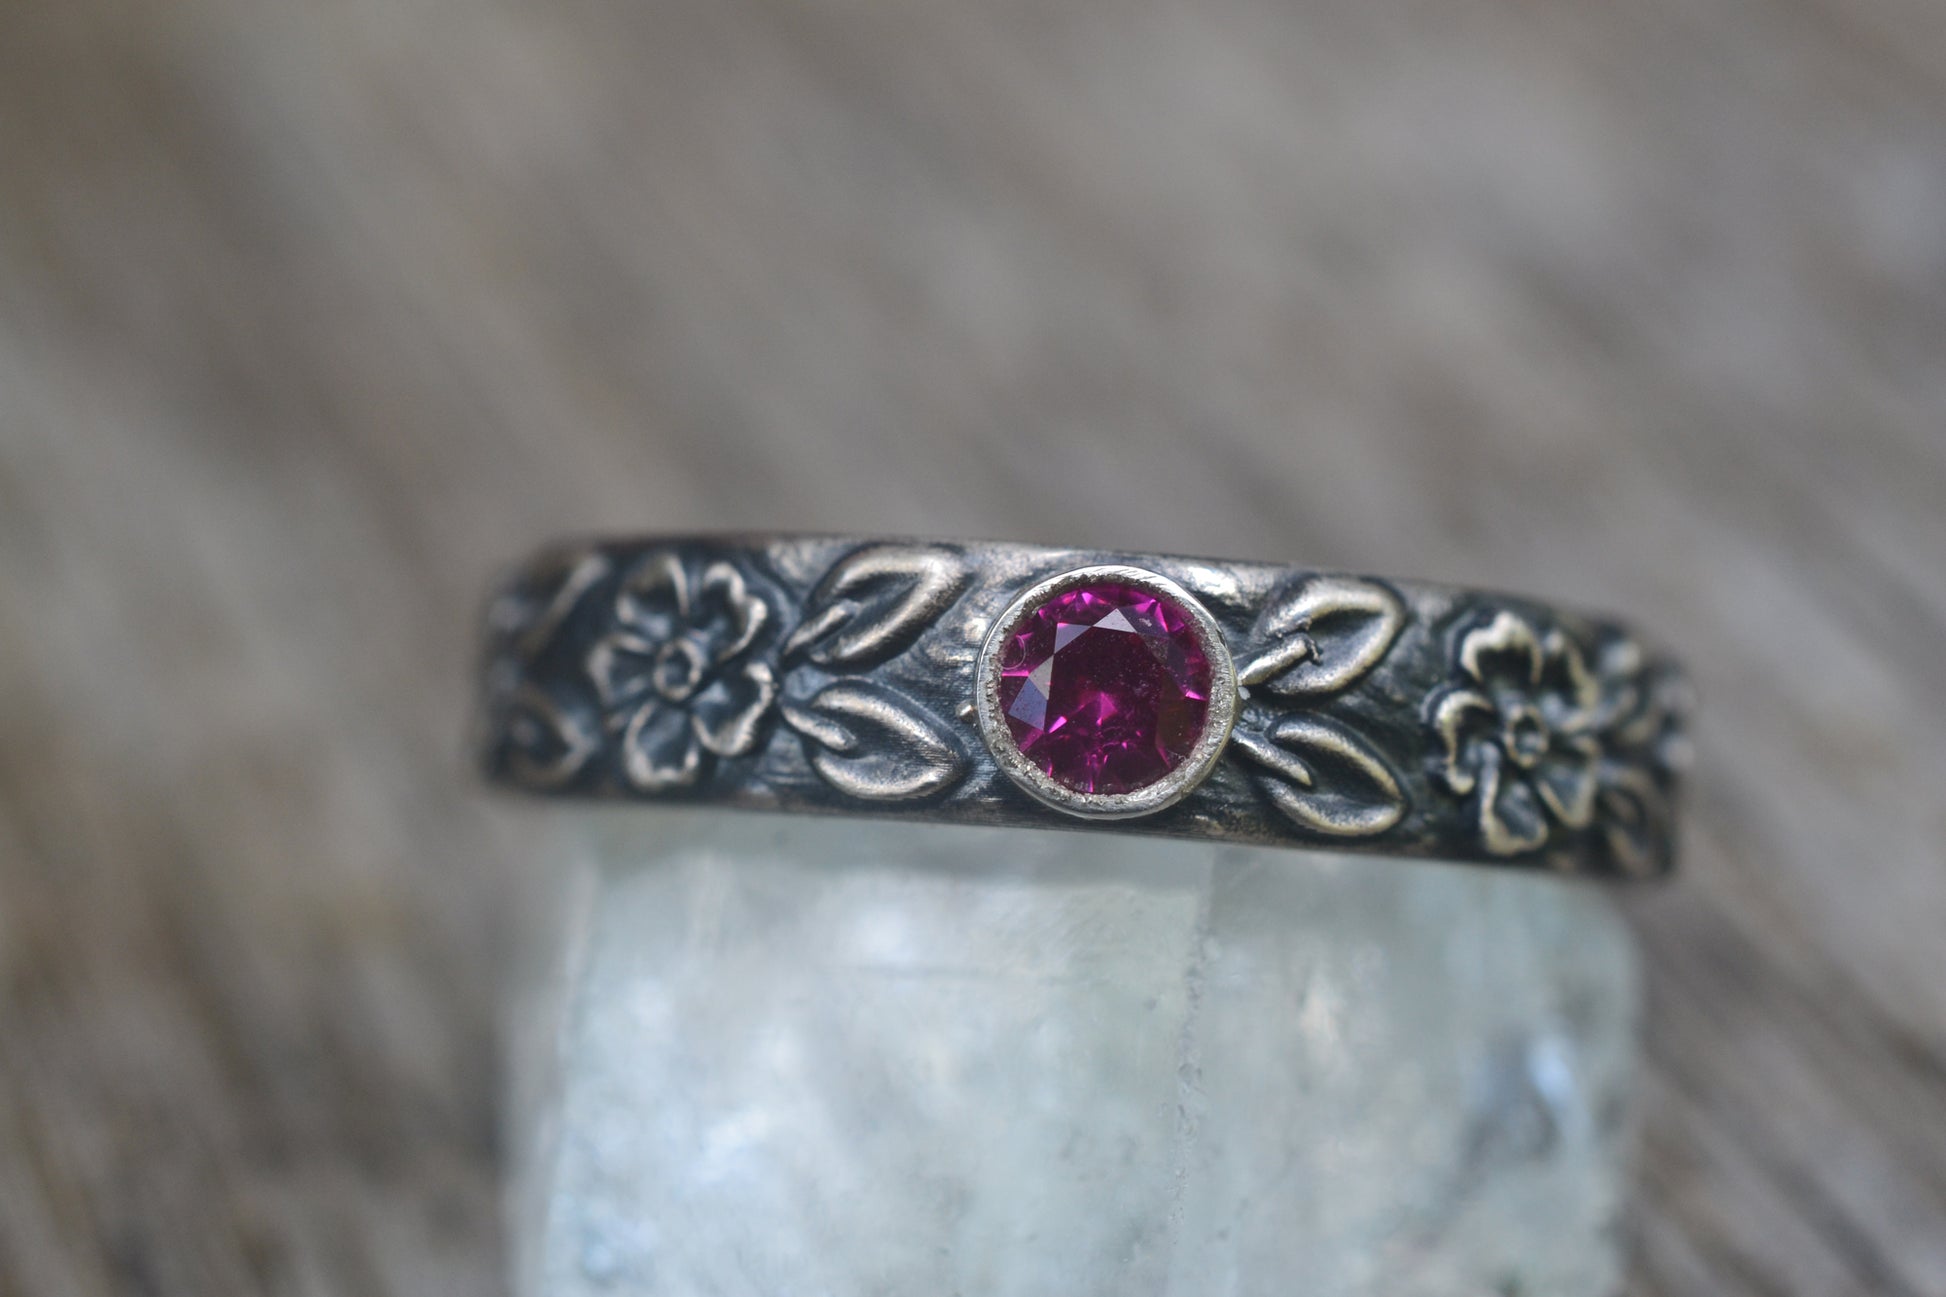 Mens Floral Wedding Band With Ruby Stone